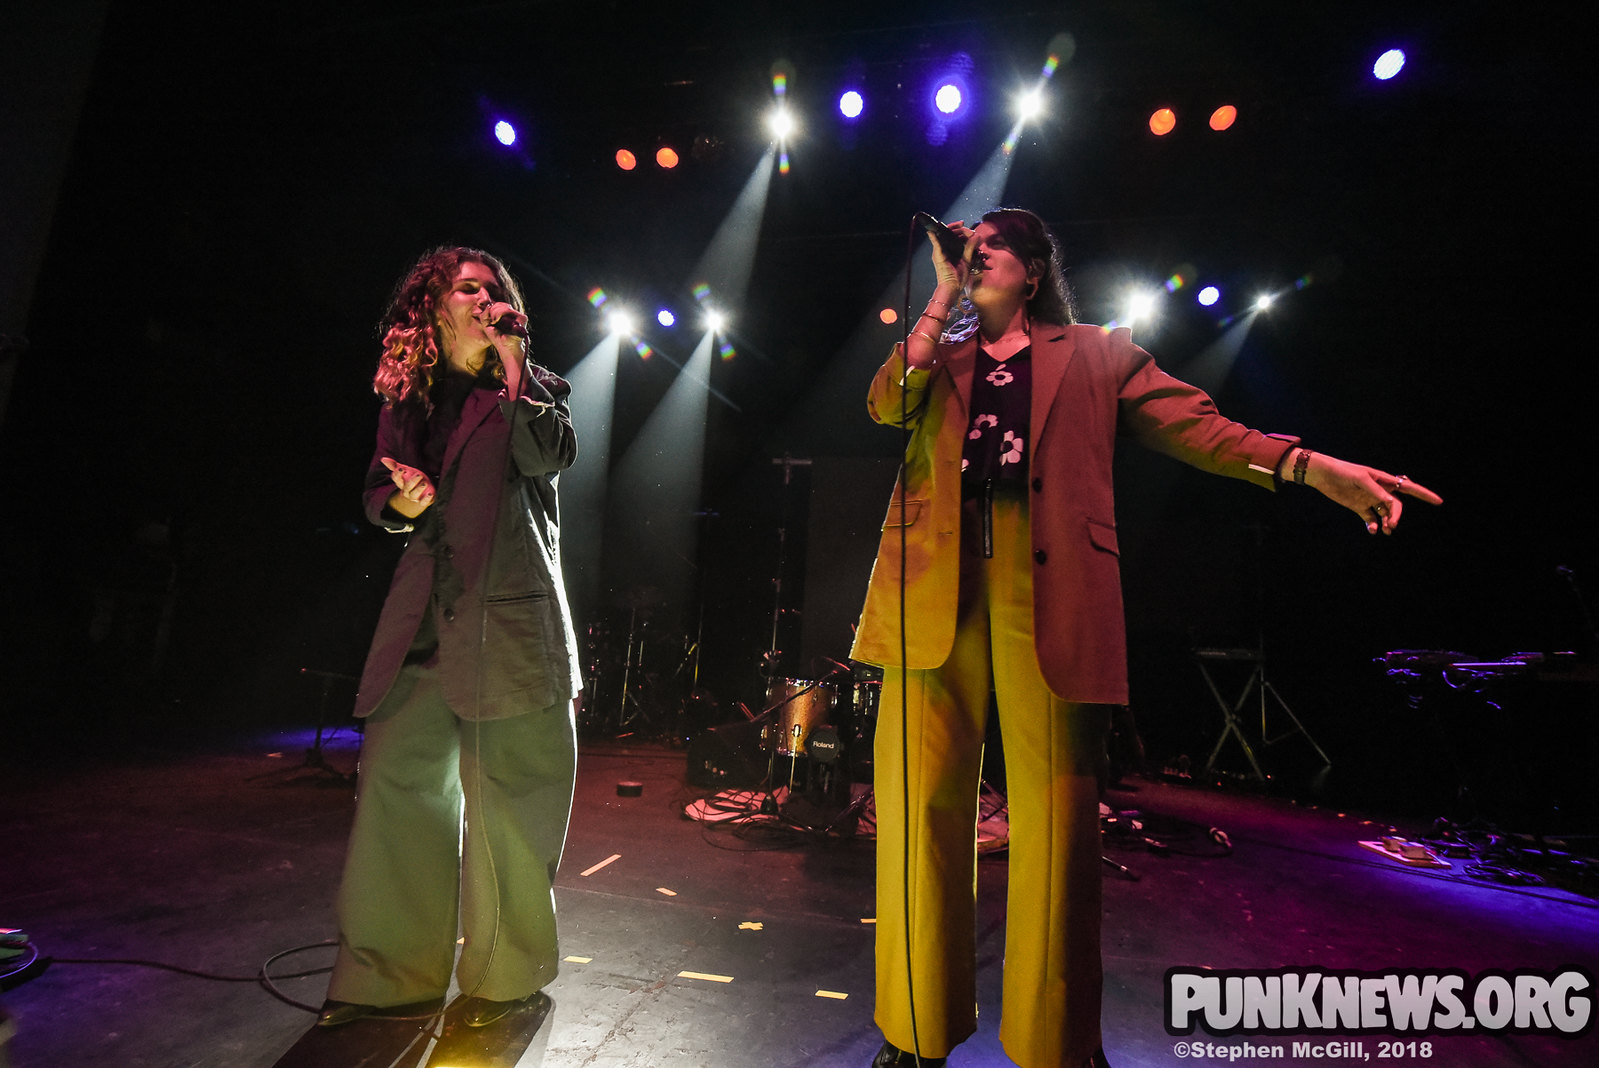 Overcoats at The Danforth Music Hall, 10/22